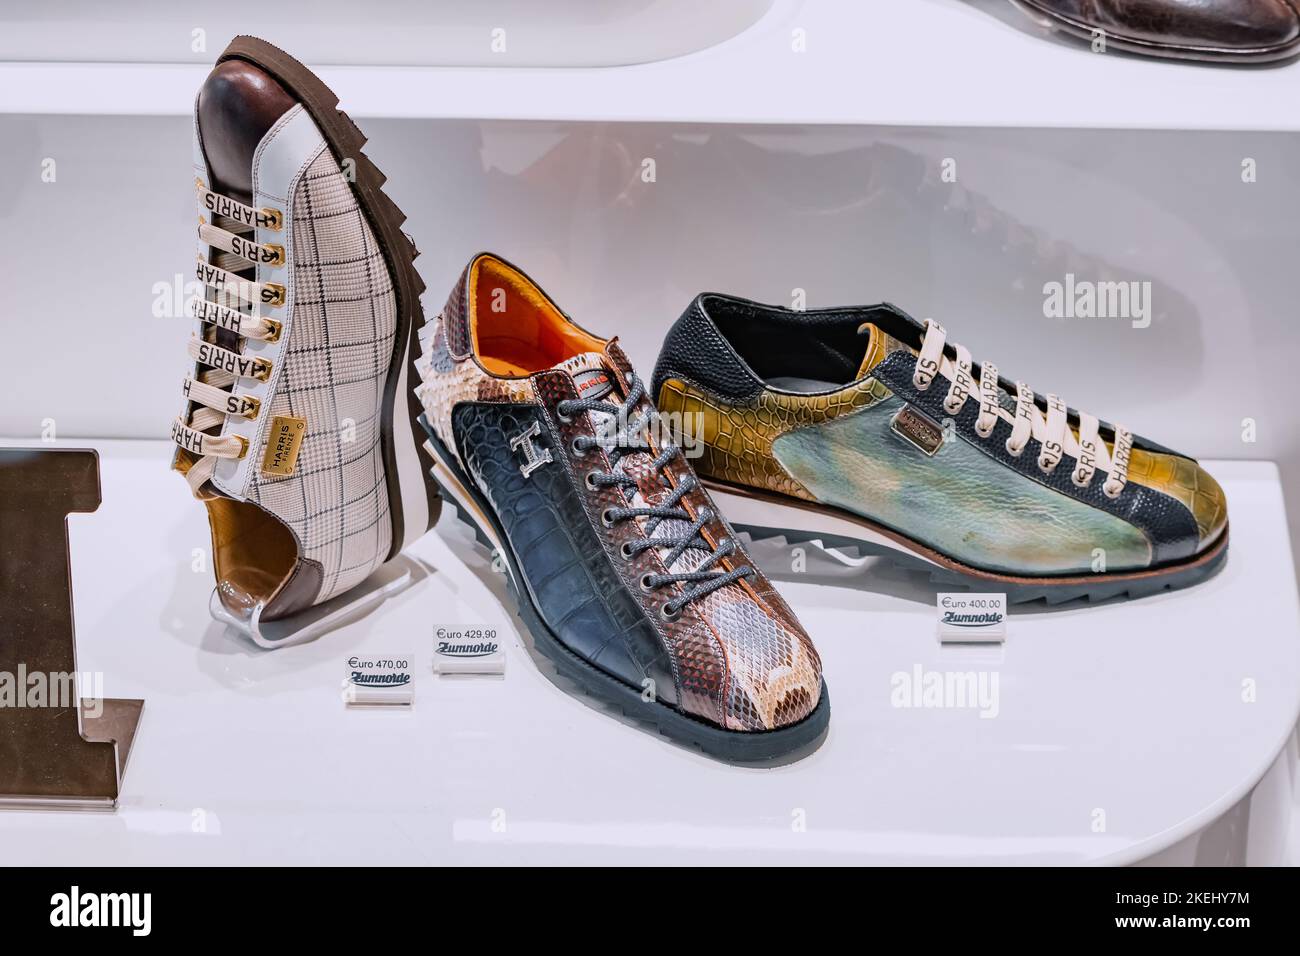 25 July 2022, Munster, Germany: Fashionable and vintage Harris shoes in the footwear shop window Stock Photo